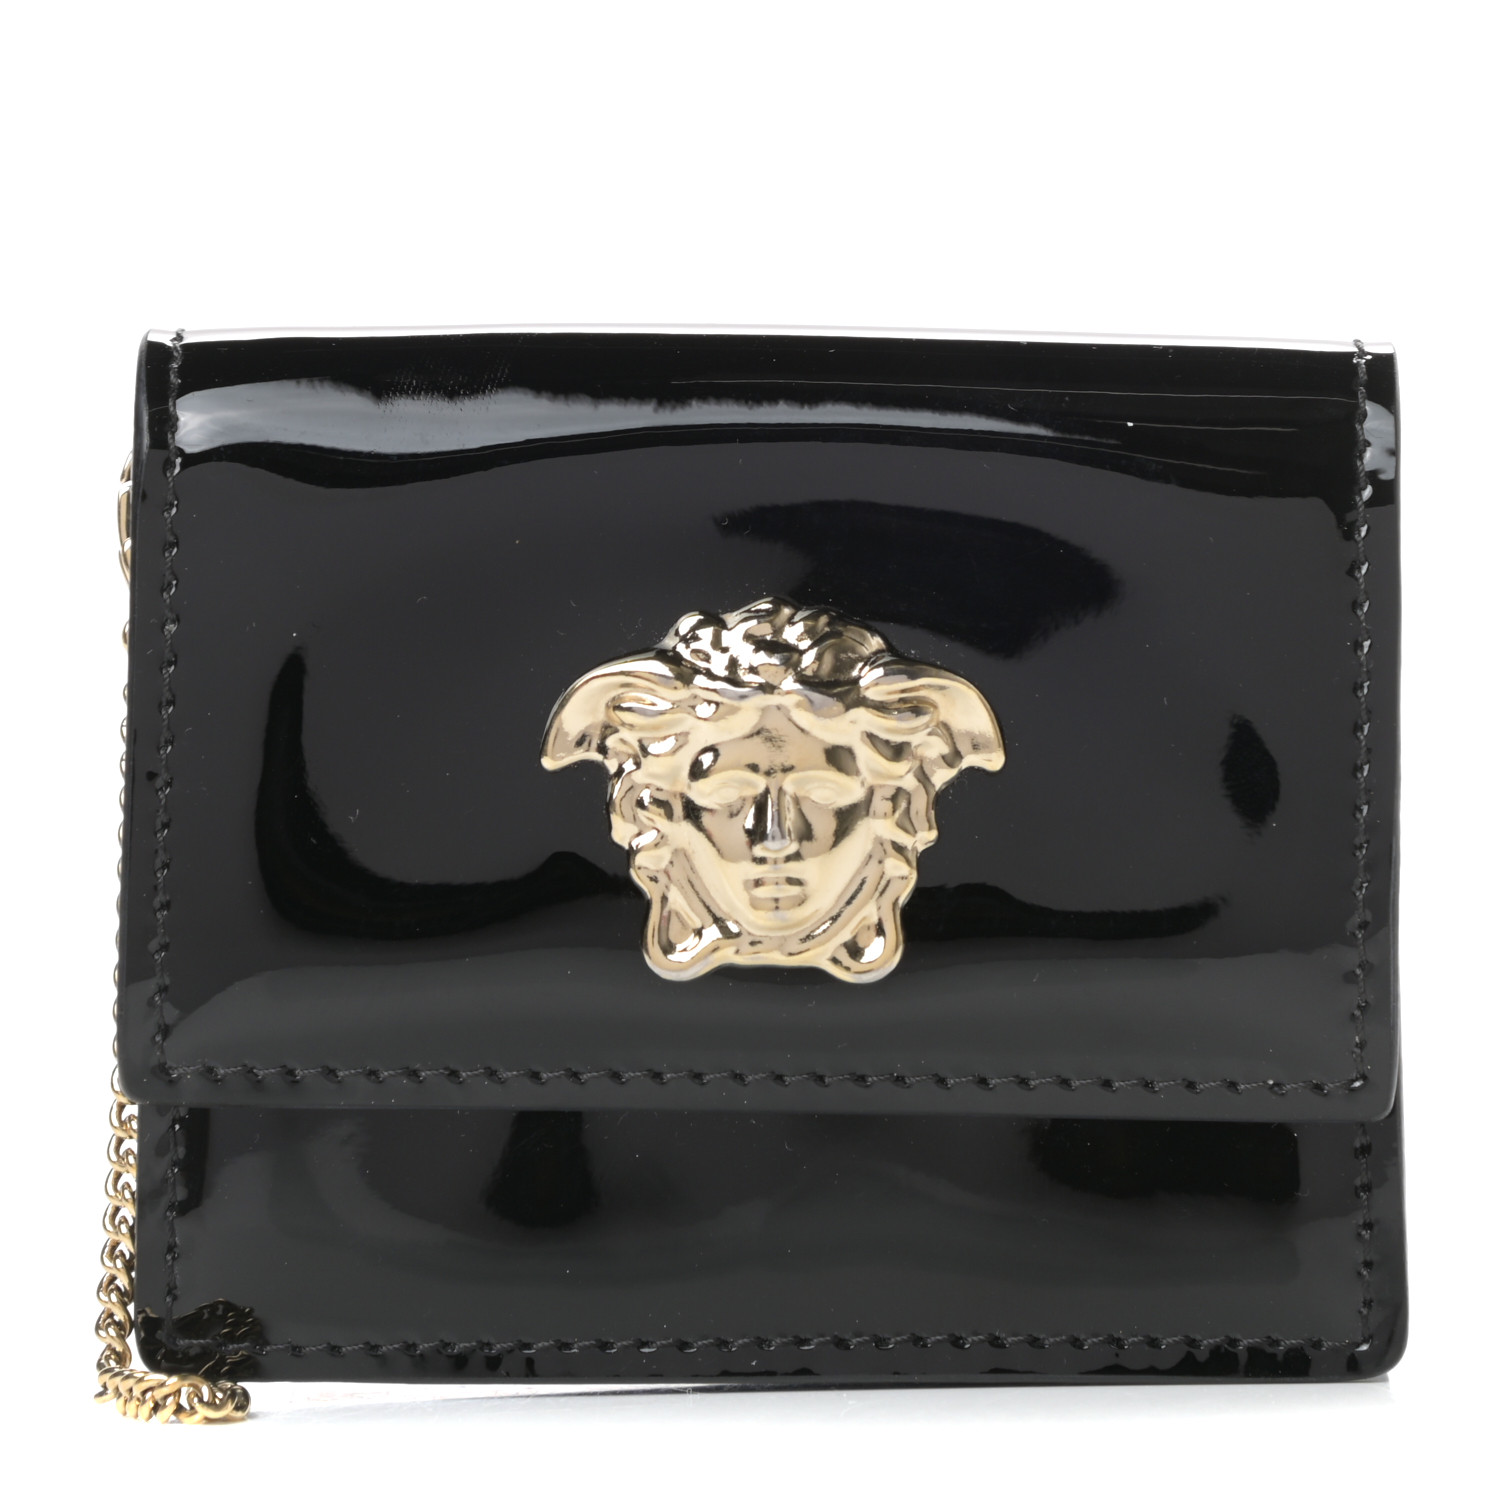 VERSACE Patent Palazzo Medusa Card Holder With Chain Black 764816 ...